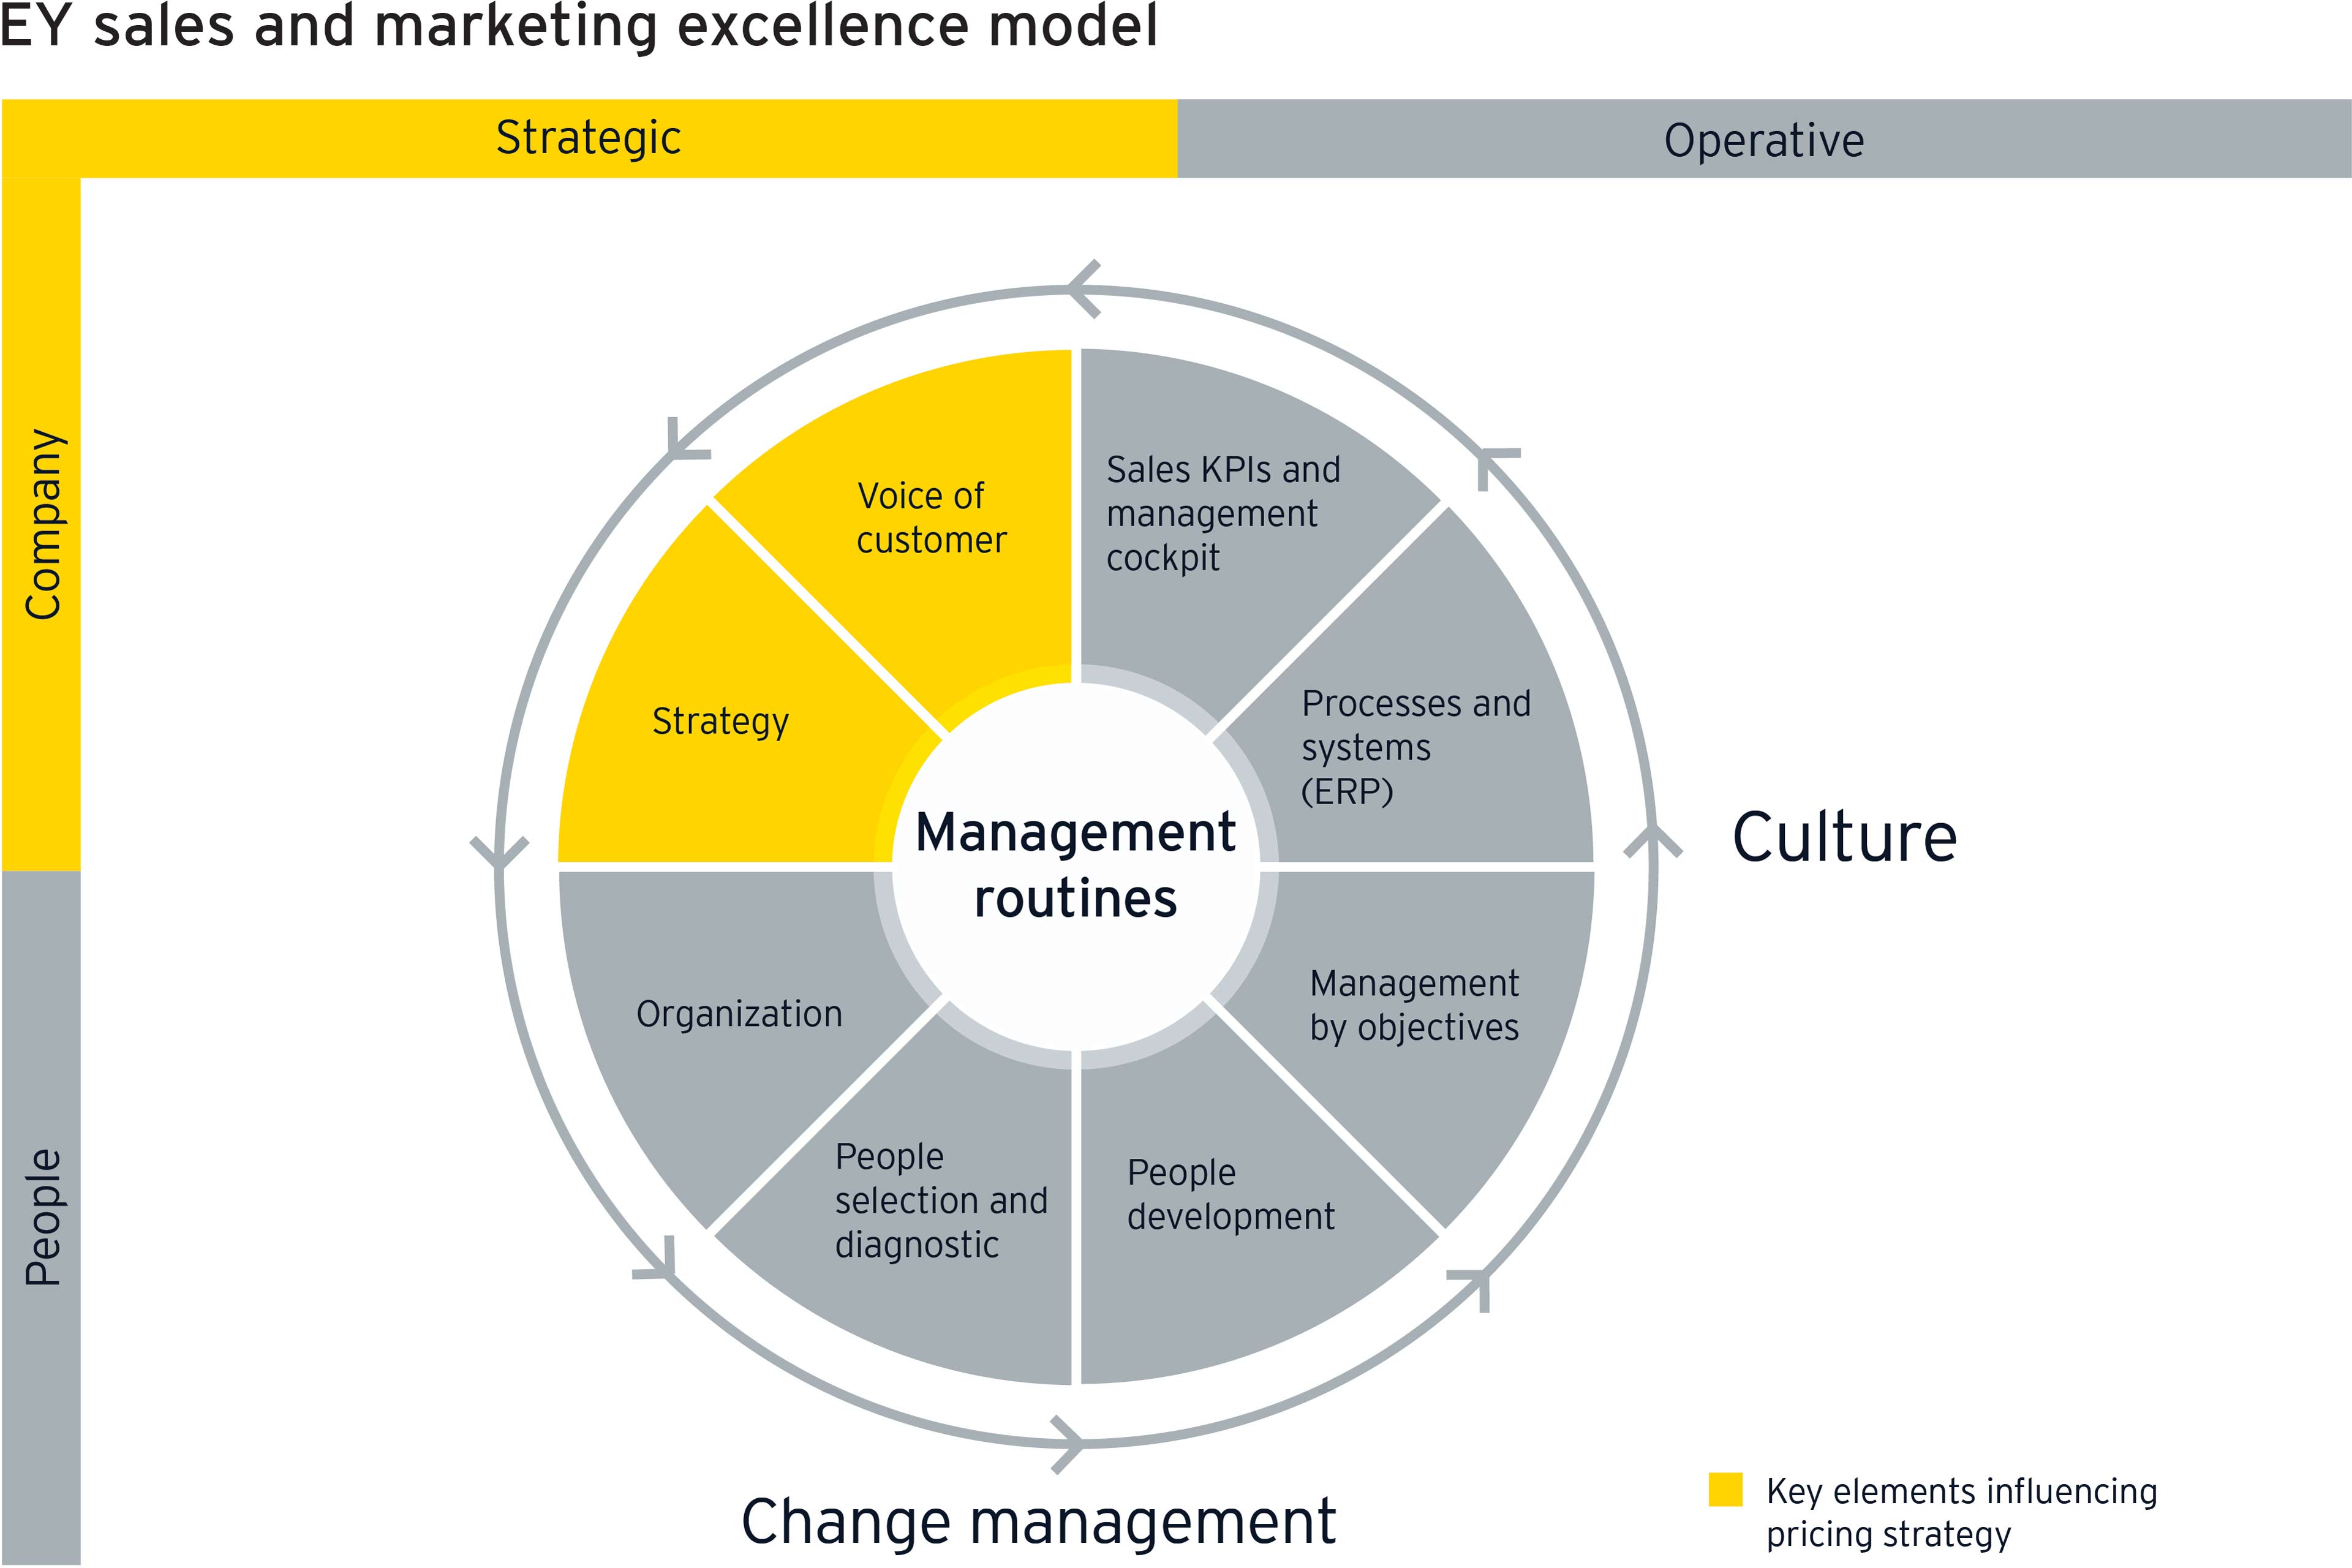 EY sales and marketing excellence model infographic